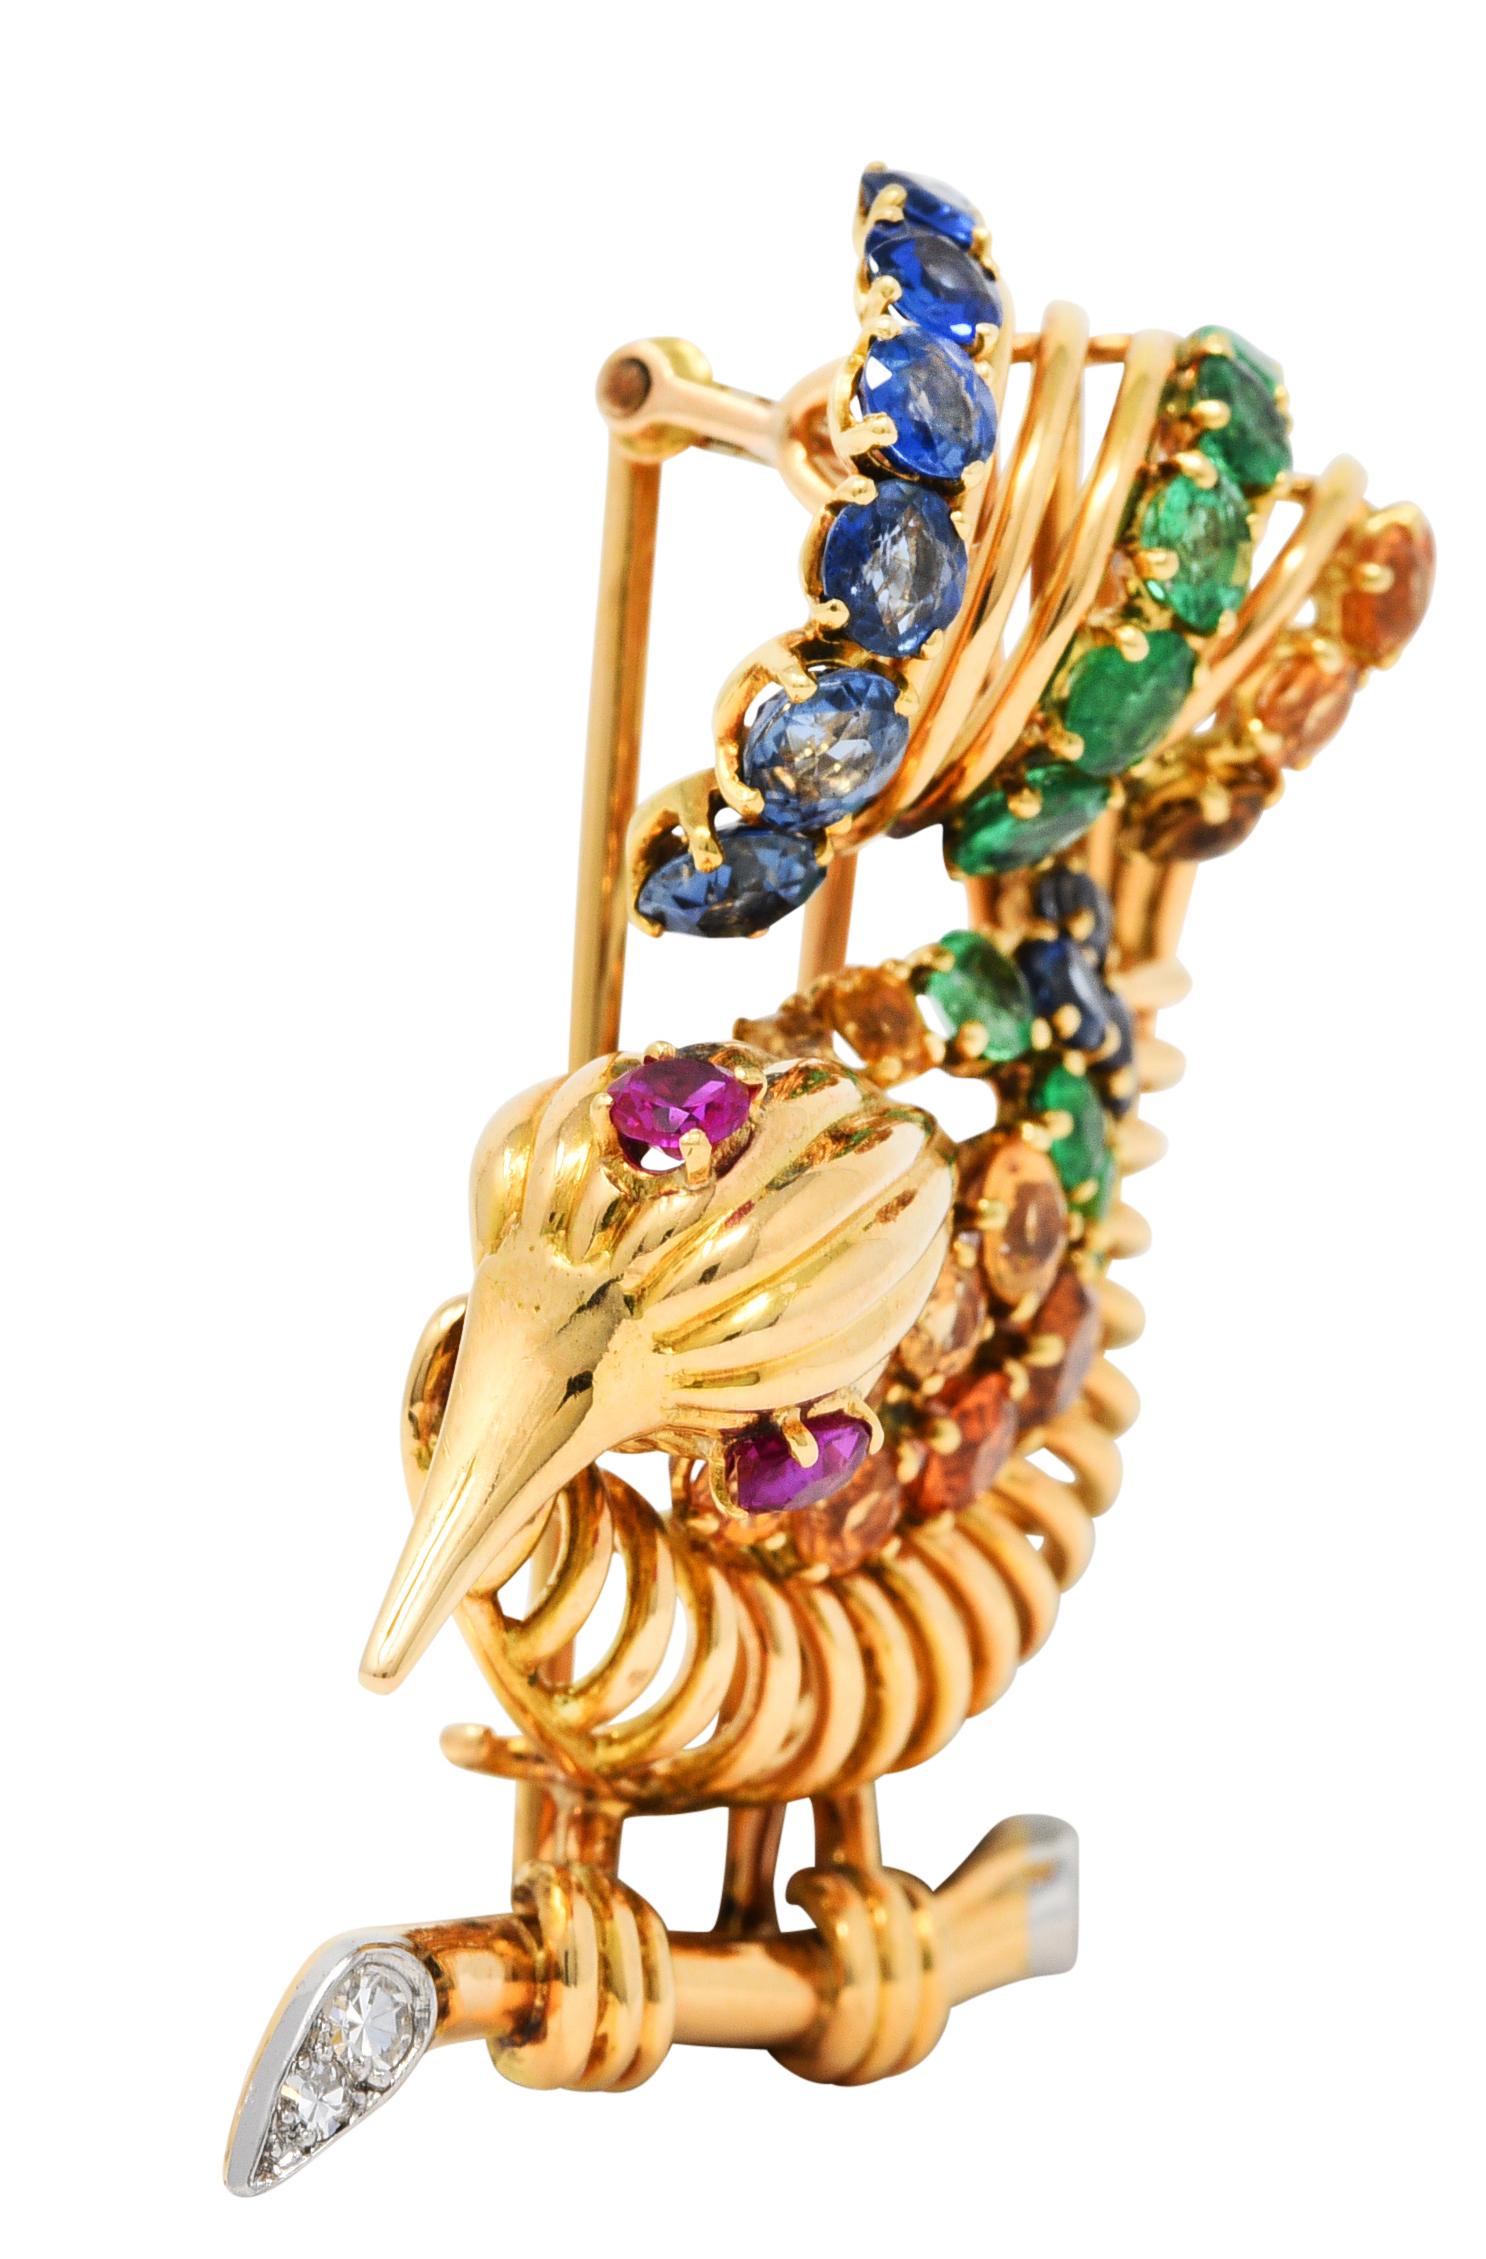 Brooch is designed as a rendered wire bird - perched on a branch and with a scrolling plumage

Deeply ridged and accented by sapphires, emerald, ruby, citrine, and diamonds

Eyes are purplish red rubies that weigh approximately 0.30 carat

Sapphires